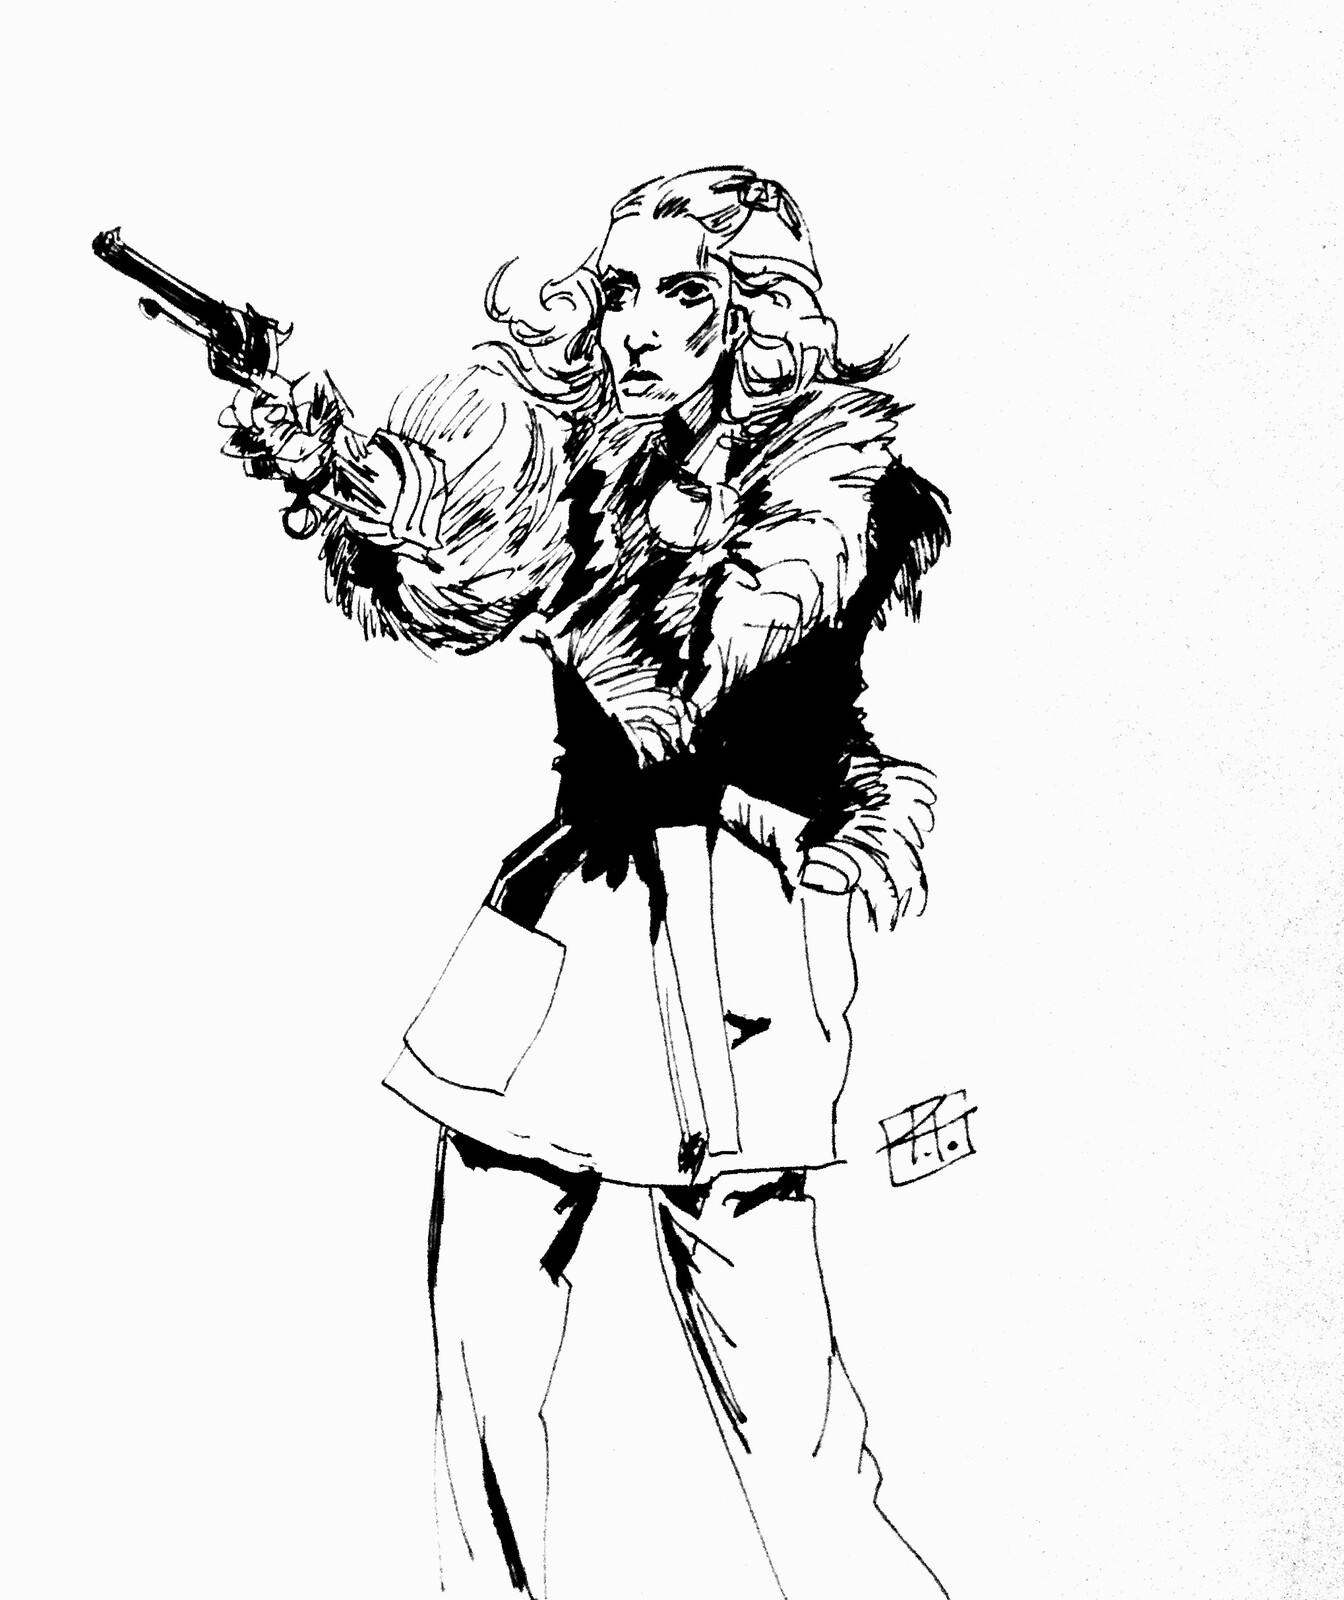 A Spy In The Cold - Plain Inks